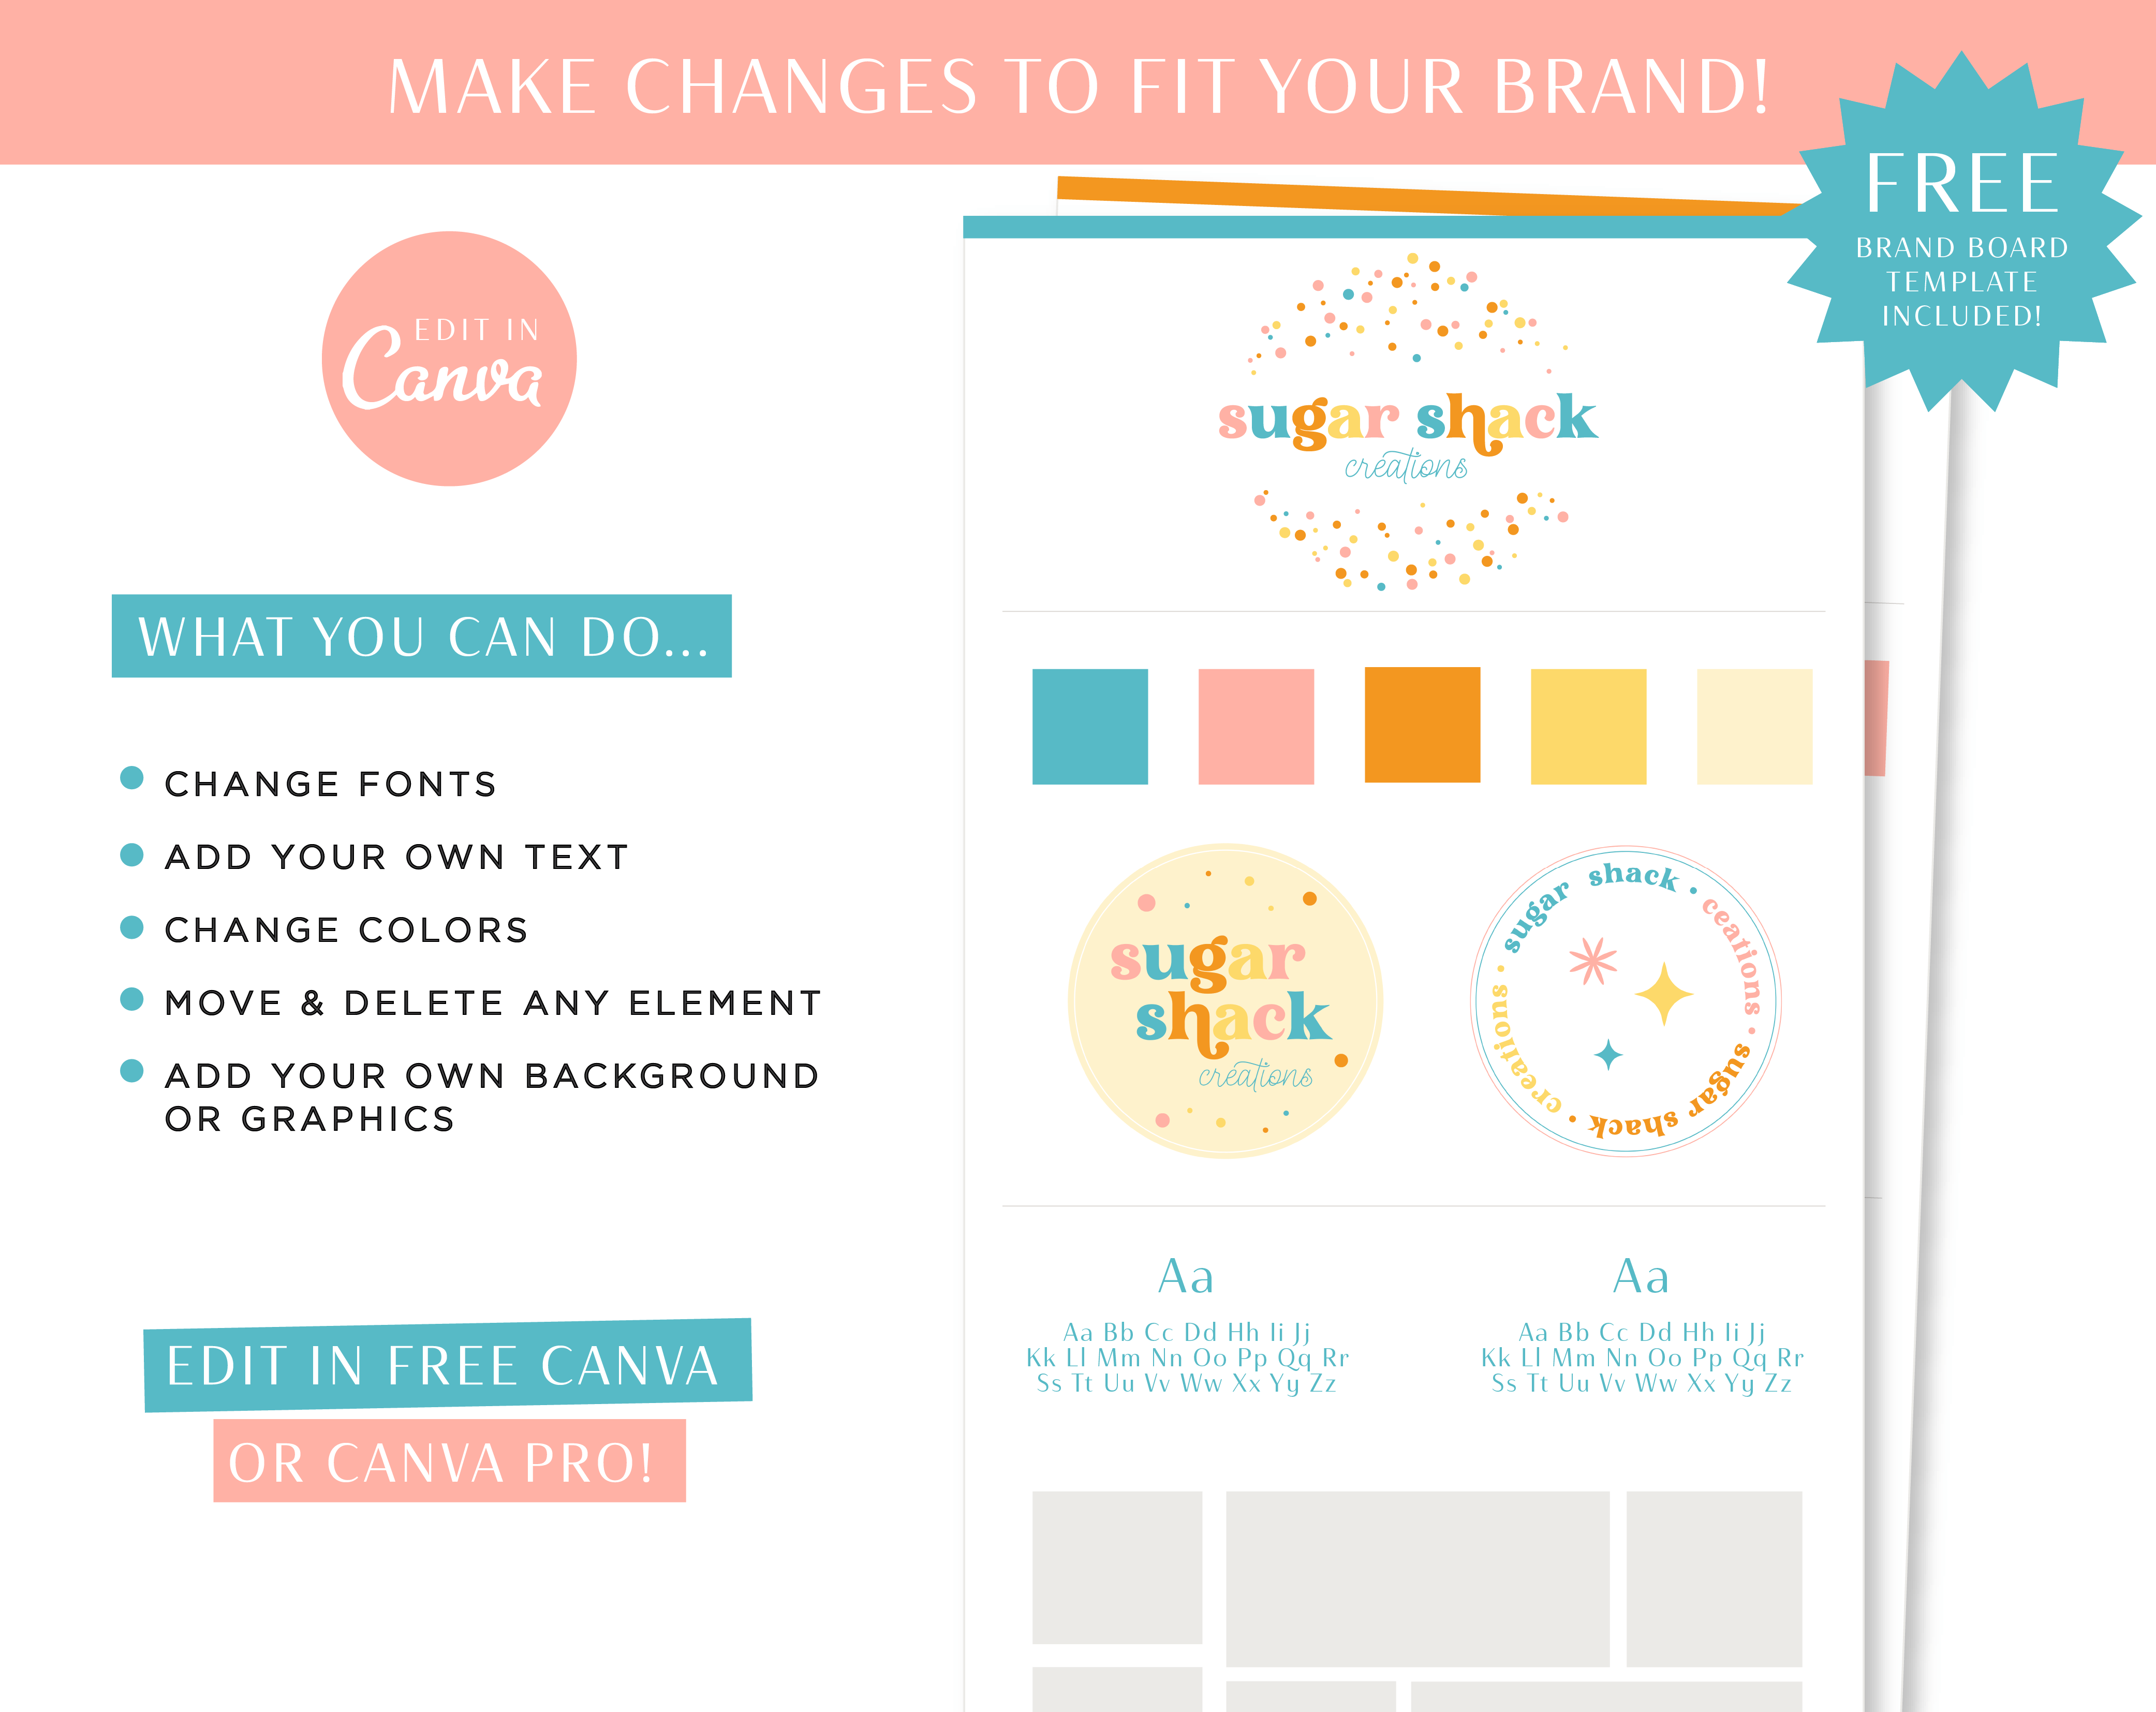 Bright Polka Dot Canva Logo for Business coaches, photographers, podcasters, online entrepreneurs, bloggers, content marketers, and any small business!